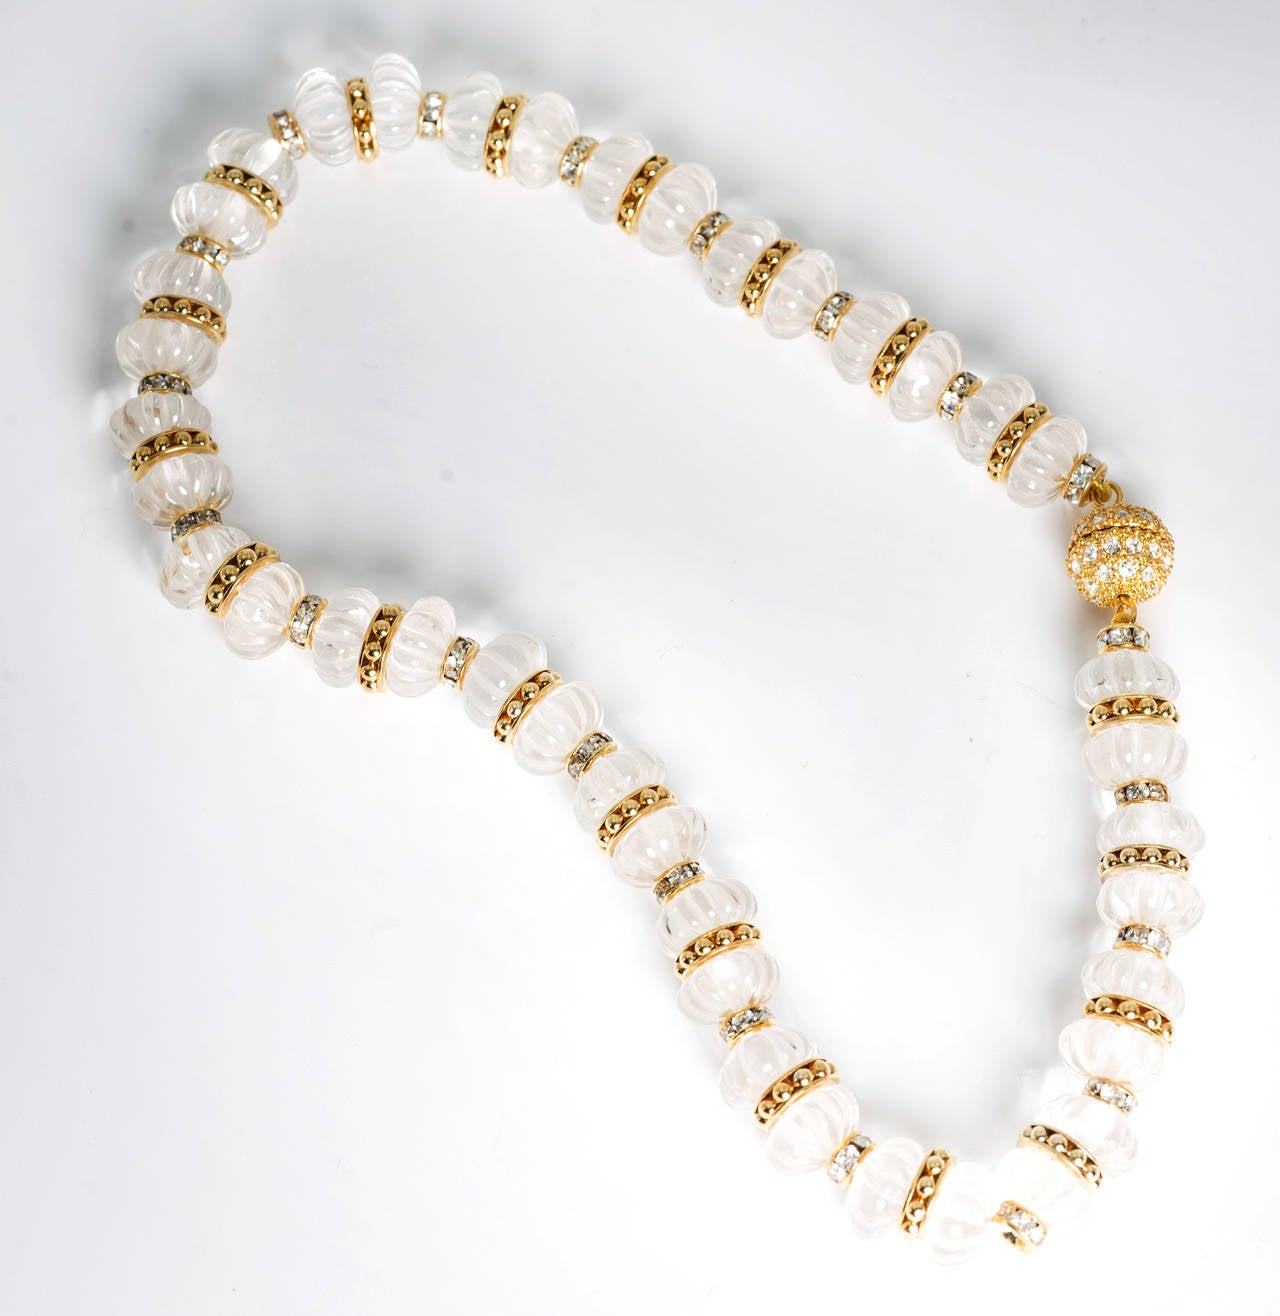 Elegant real fluted rock crystal beads strung with gilt rondels and Swarovski crystal set rondels. Charming and pretty 10mm bead 13'' long choker.